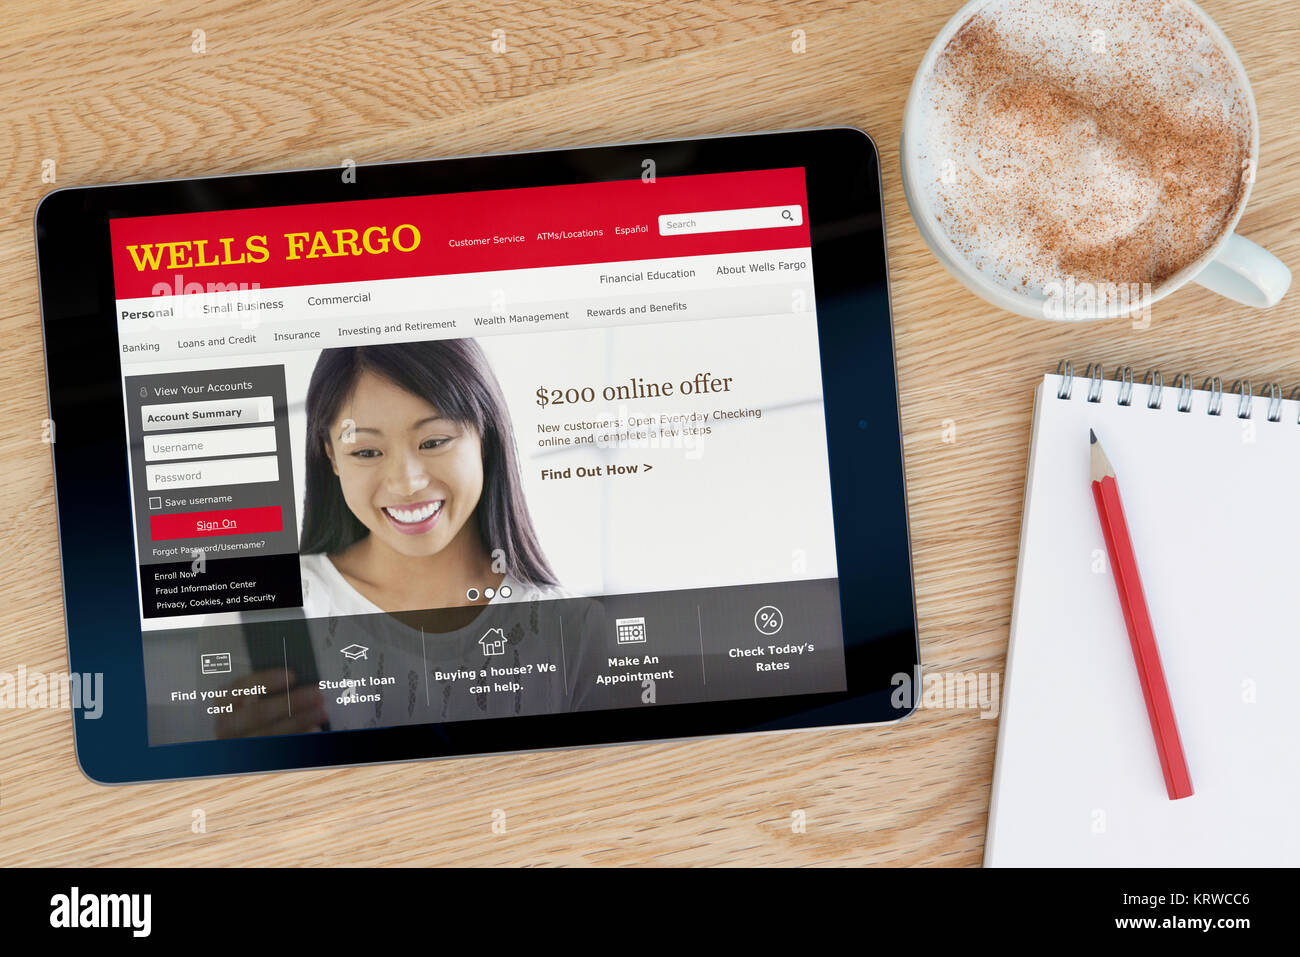 The Wells Fargo website on an iPad tablet device which rests on a wooden table beside a notepad and pencil and a cup of coffee (Editorial only) Stock Photo